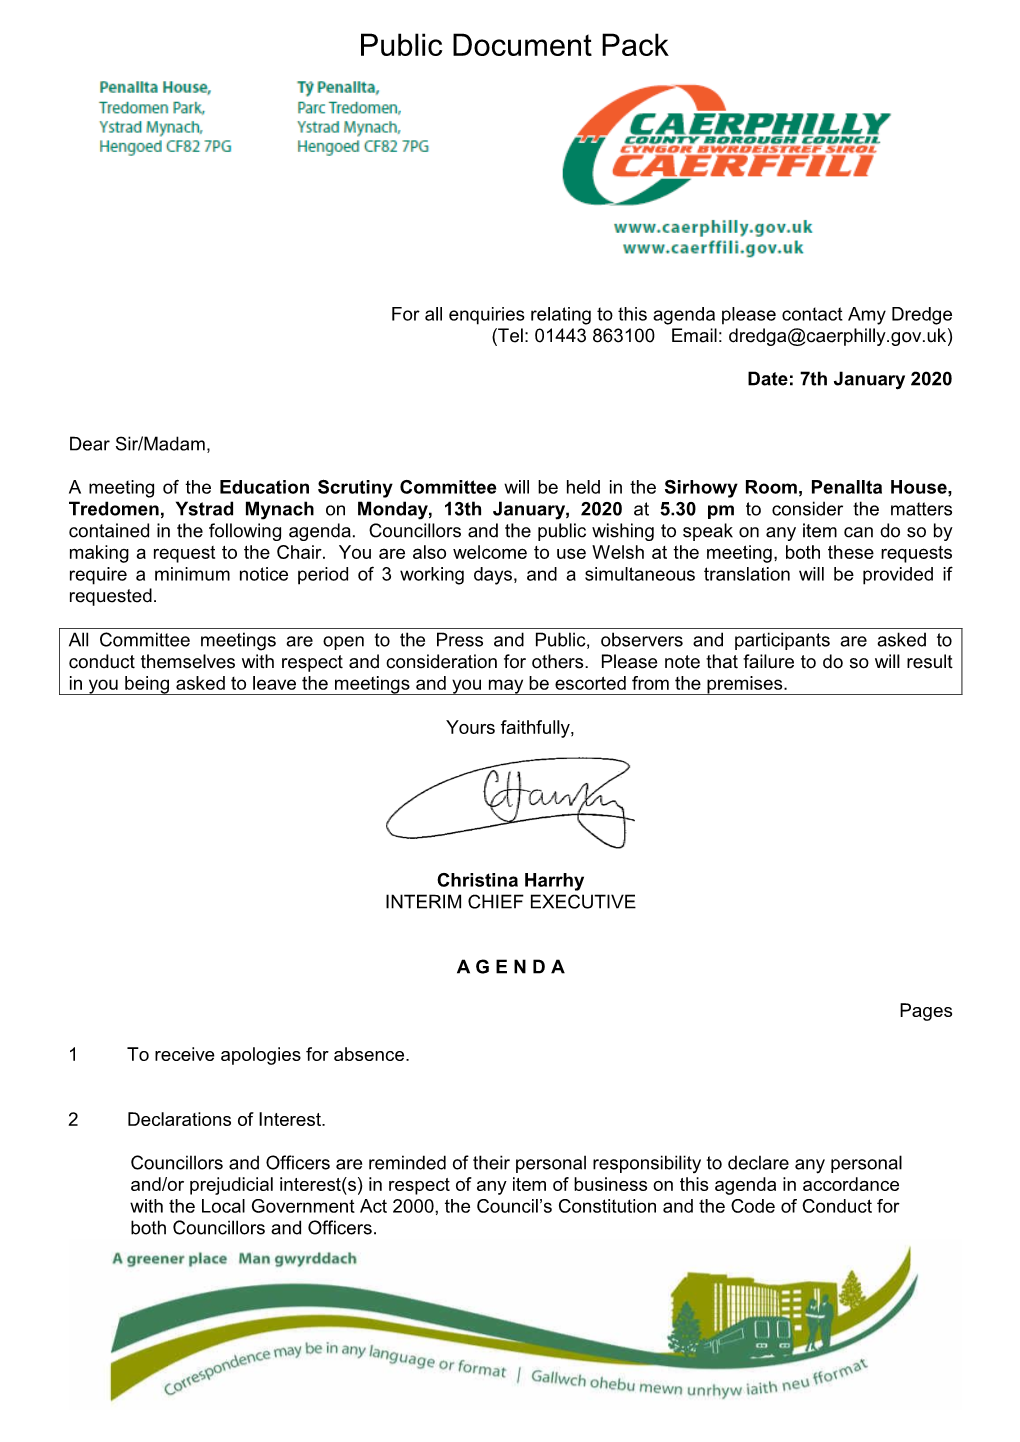 (Public Pack)Agenda Document for Education Scrutiny Committee, 13/01/2020 17:30